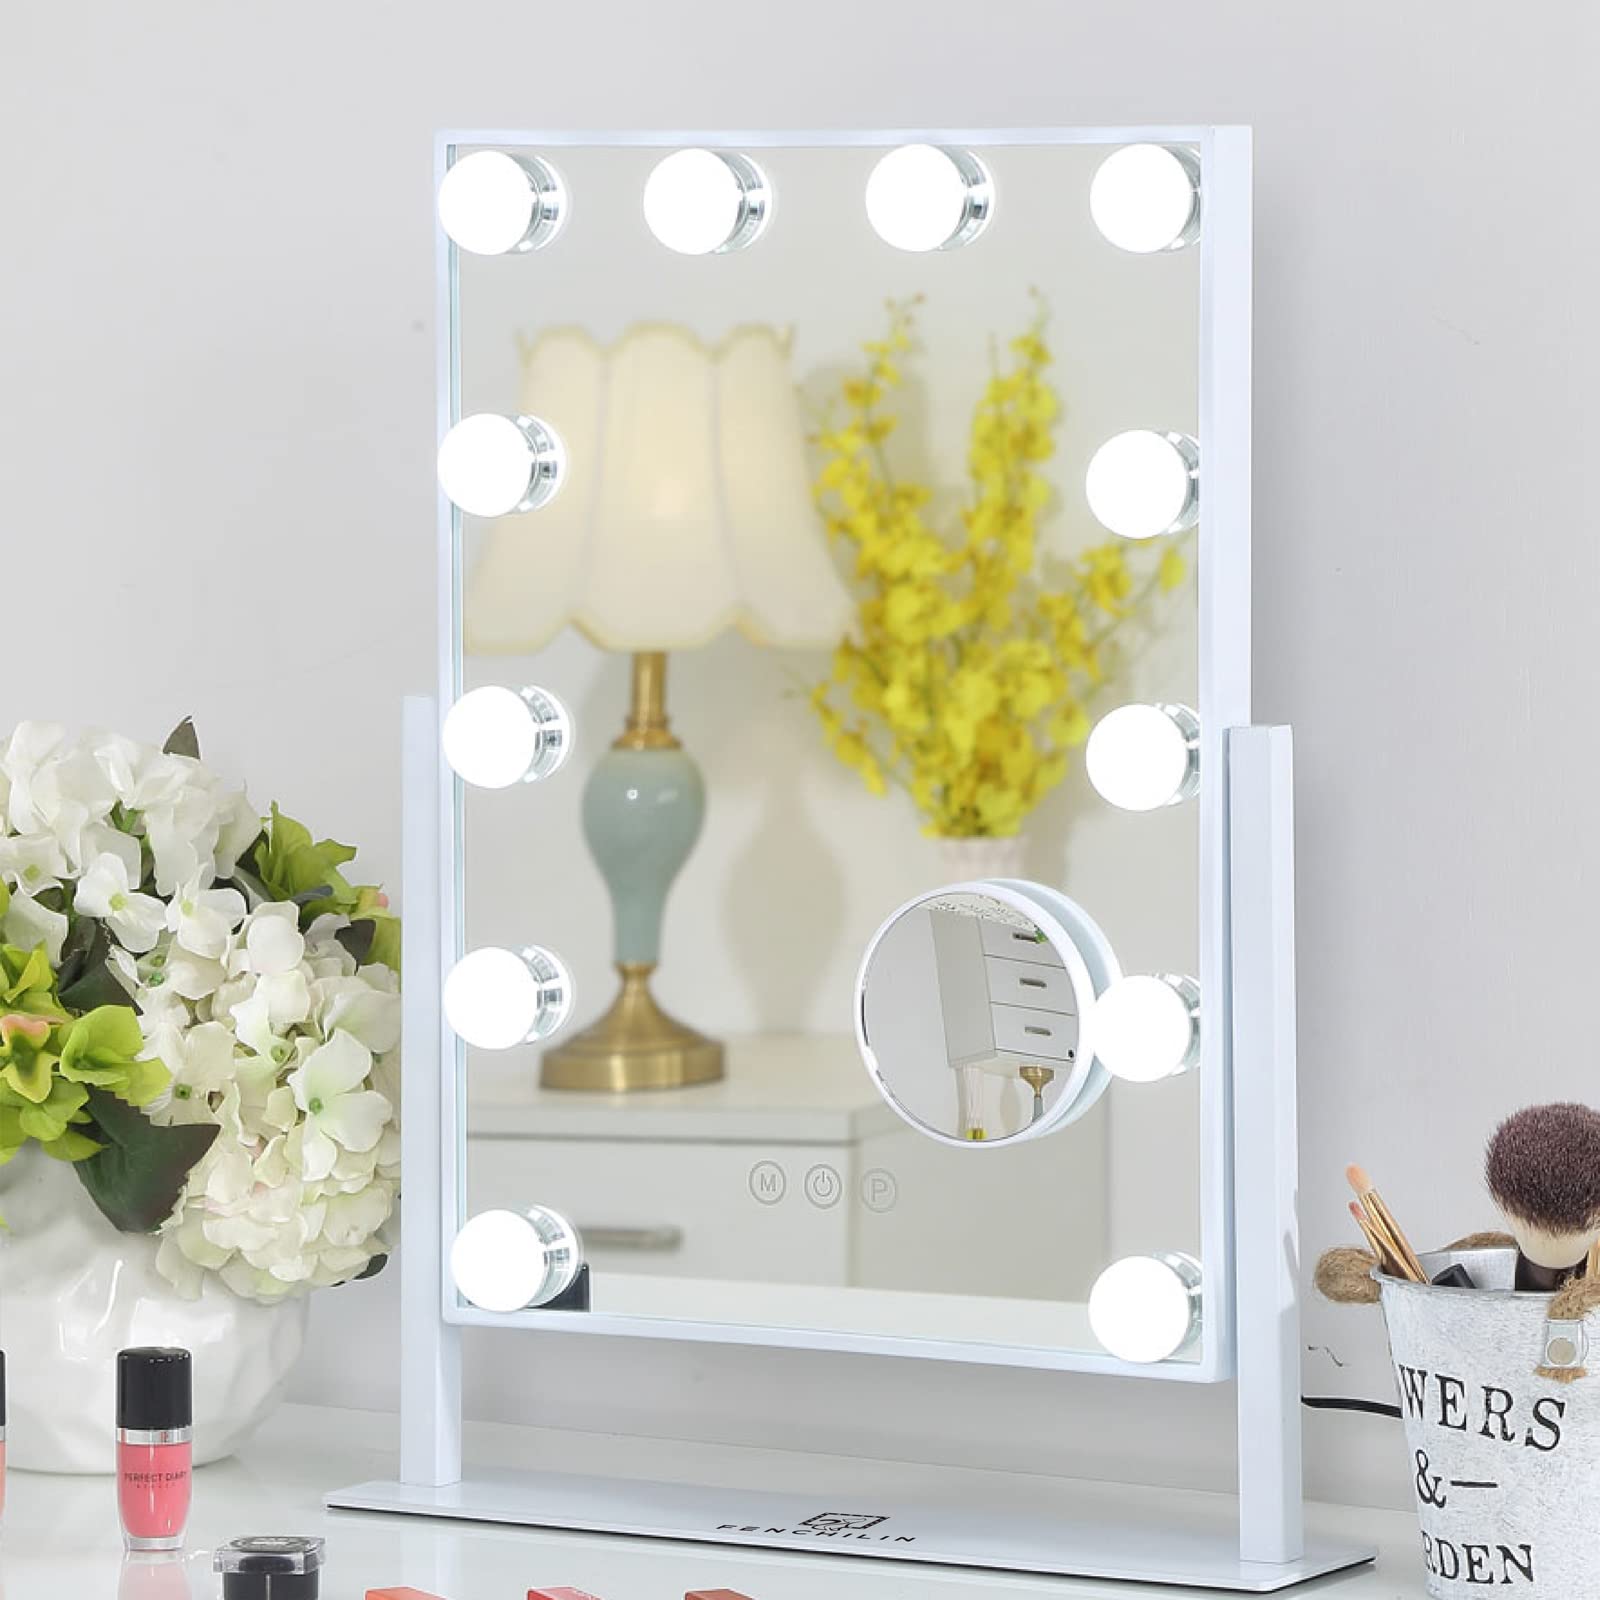 May Ilaw na Makeup Mirror Touch Control Dimmable Light Detachable Magnification Decor